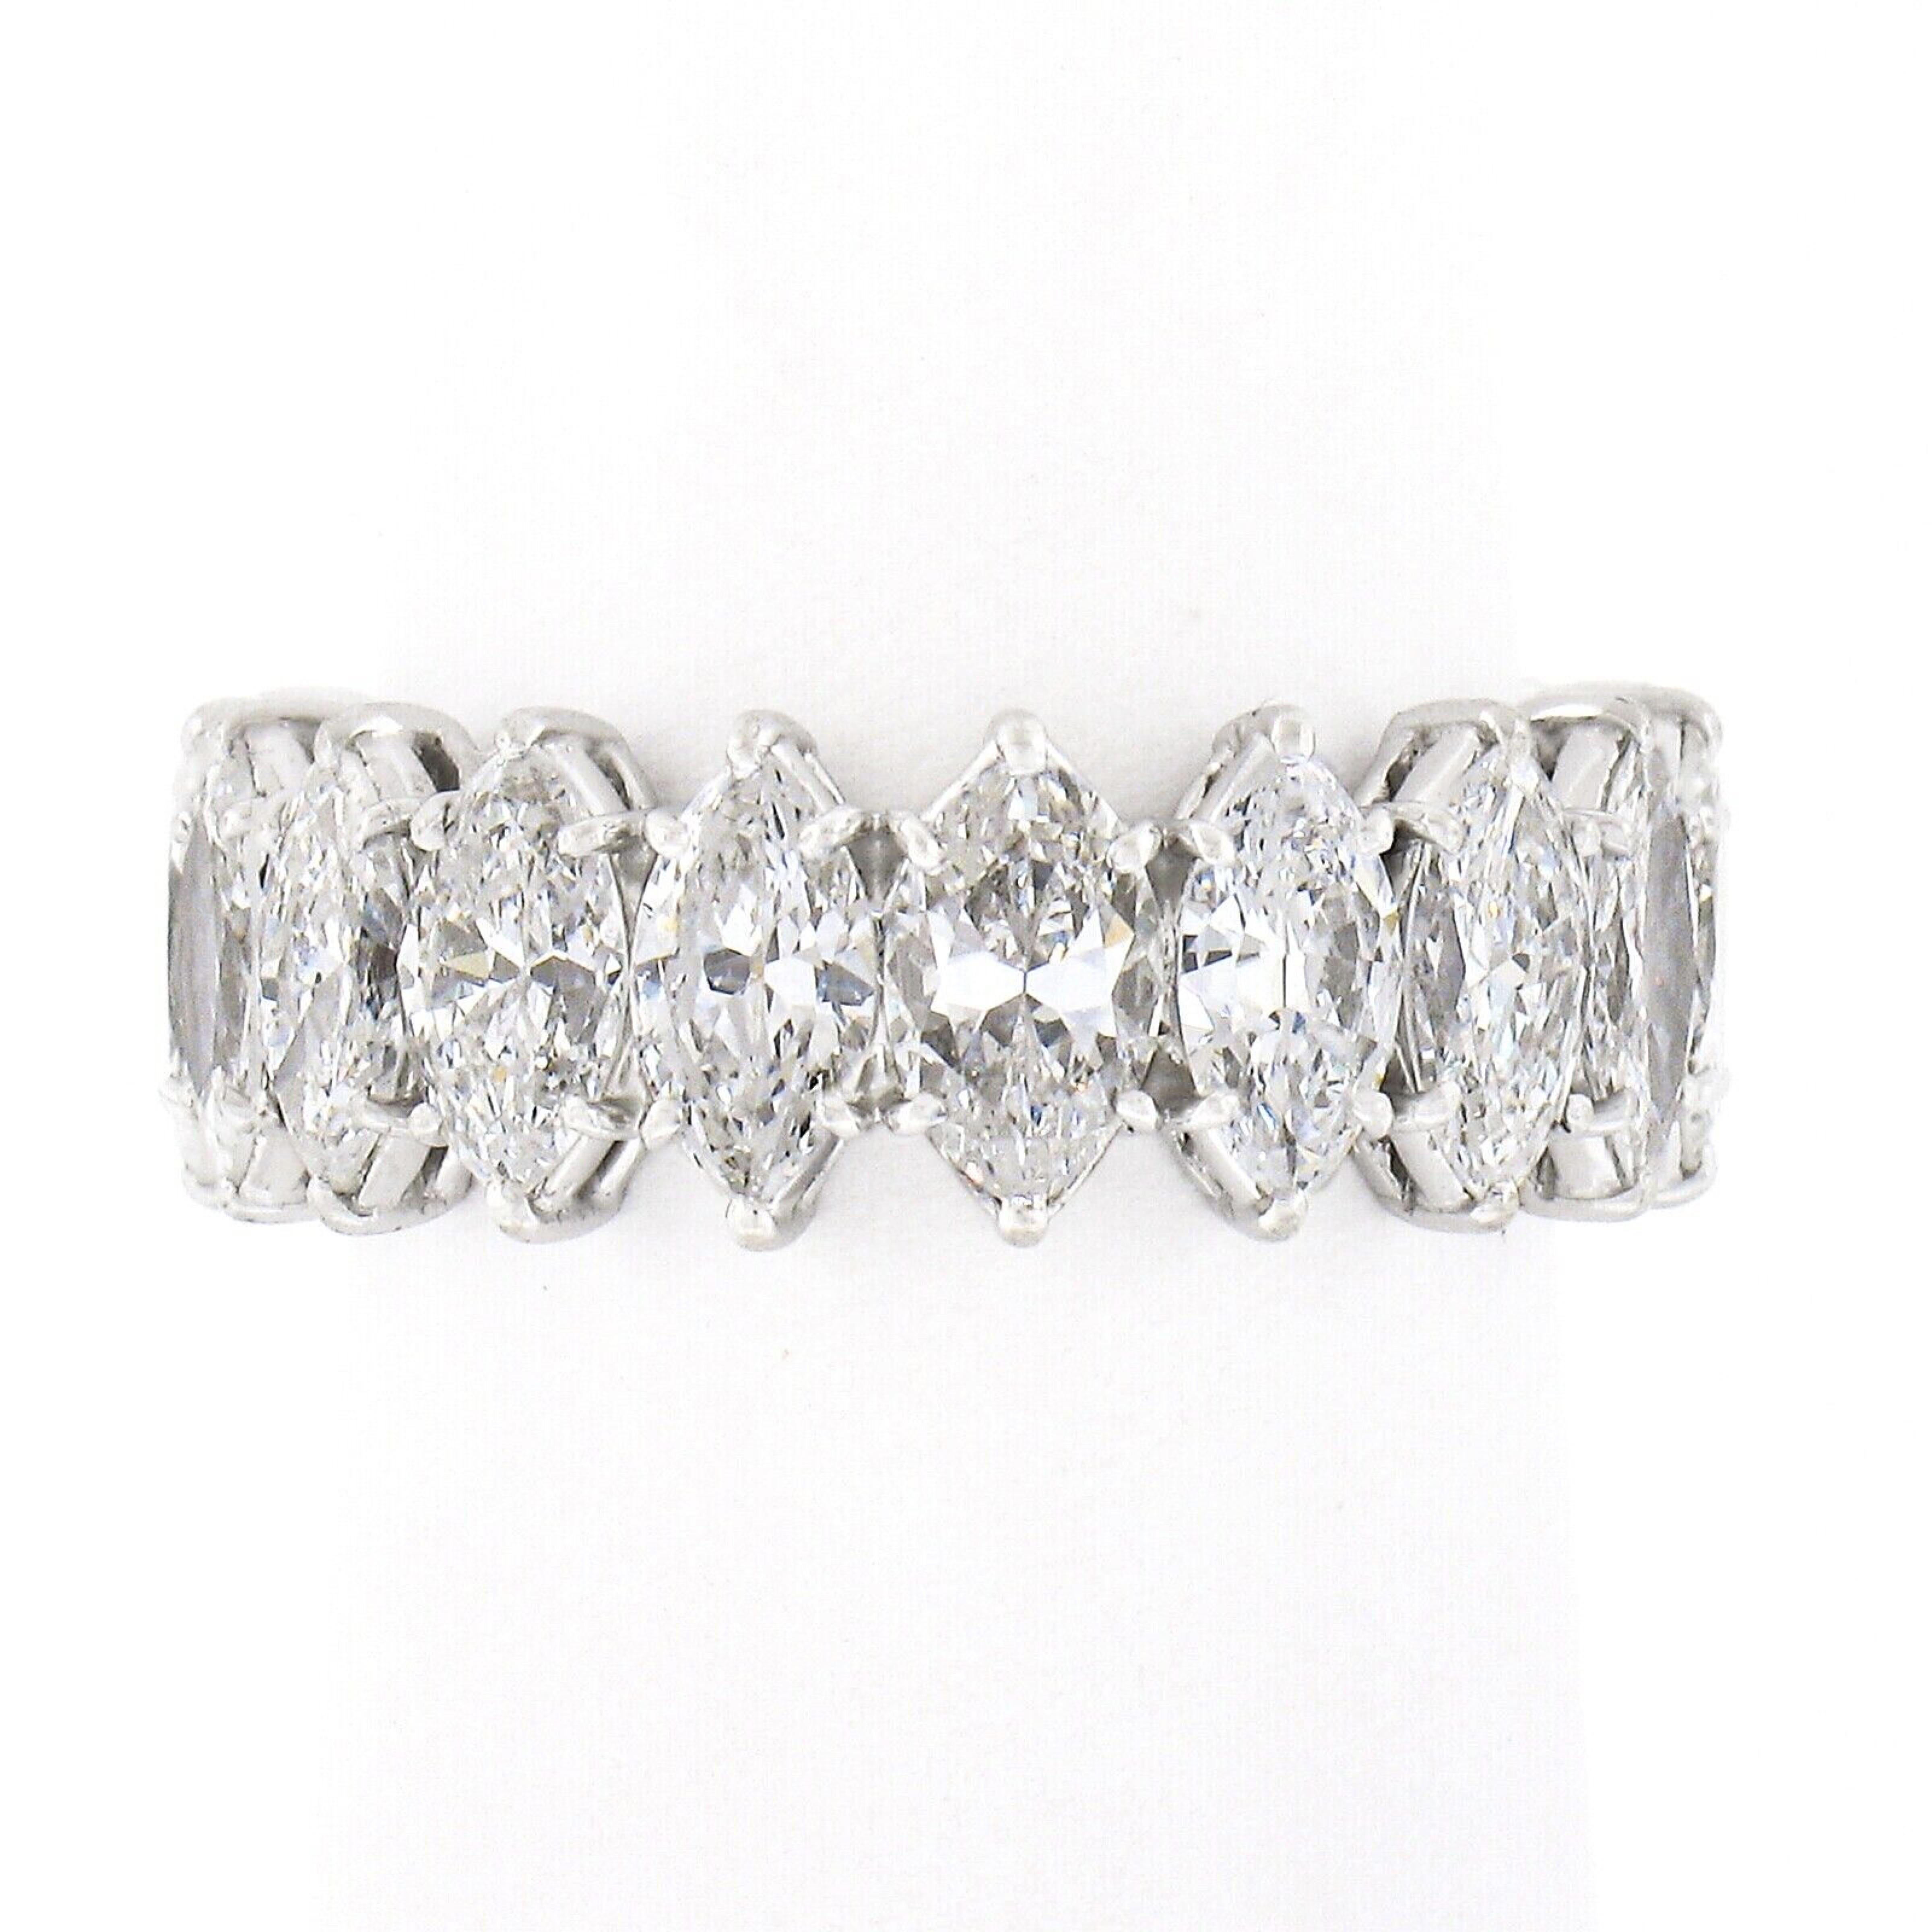 This stunning and very well made vintage diamond band was crafted from solid platinum and features a classic eternity style made from 18 marquise cut diamonds that give it a truly unique look. These stunning diamonds are neatly prong set throughout